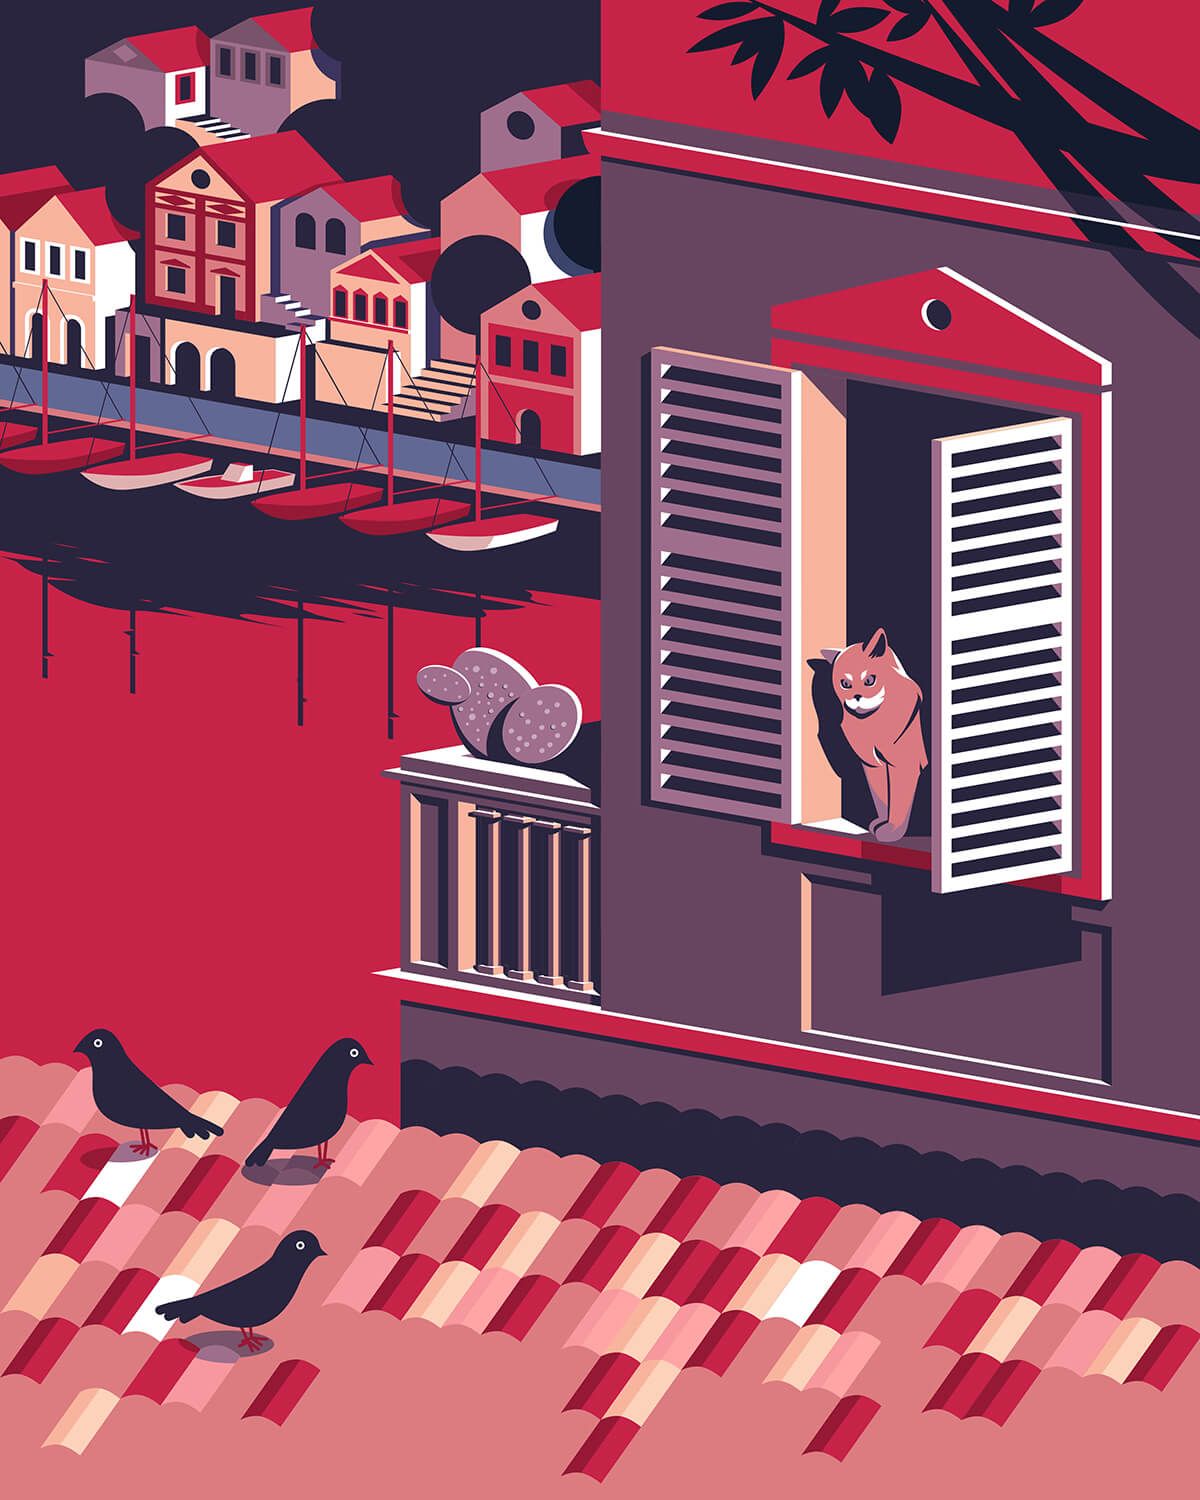 Stylized image of a seaside town with houses, a cat in the window, and pigeons on the roof